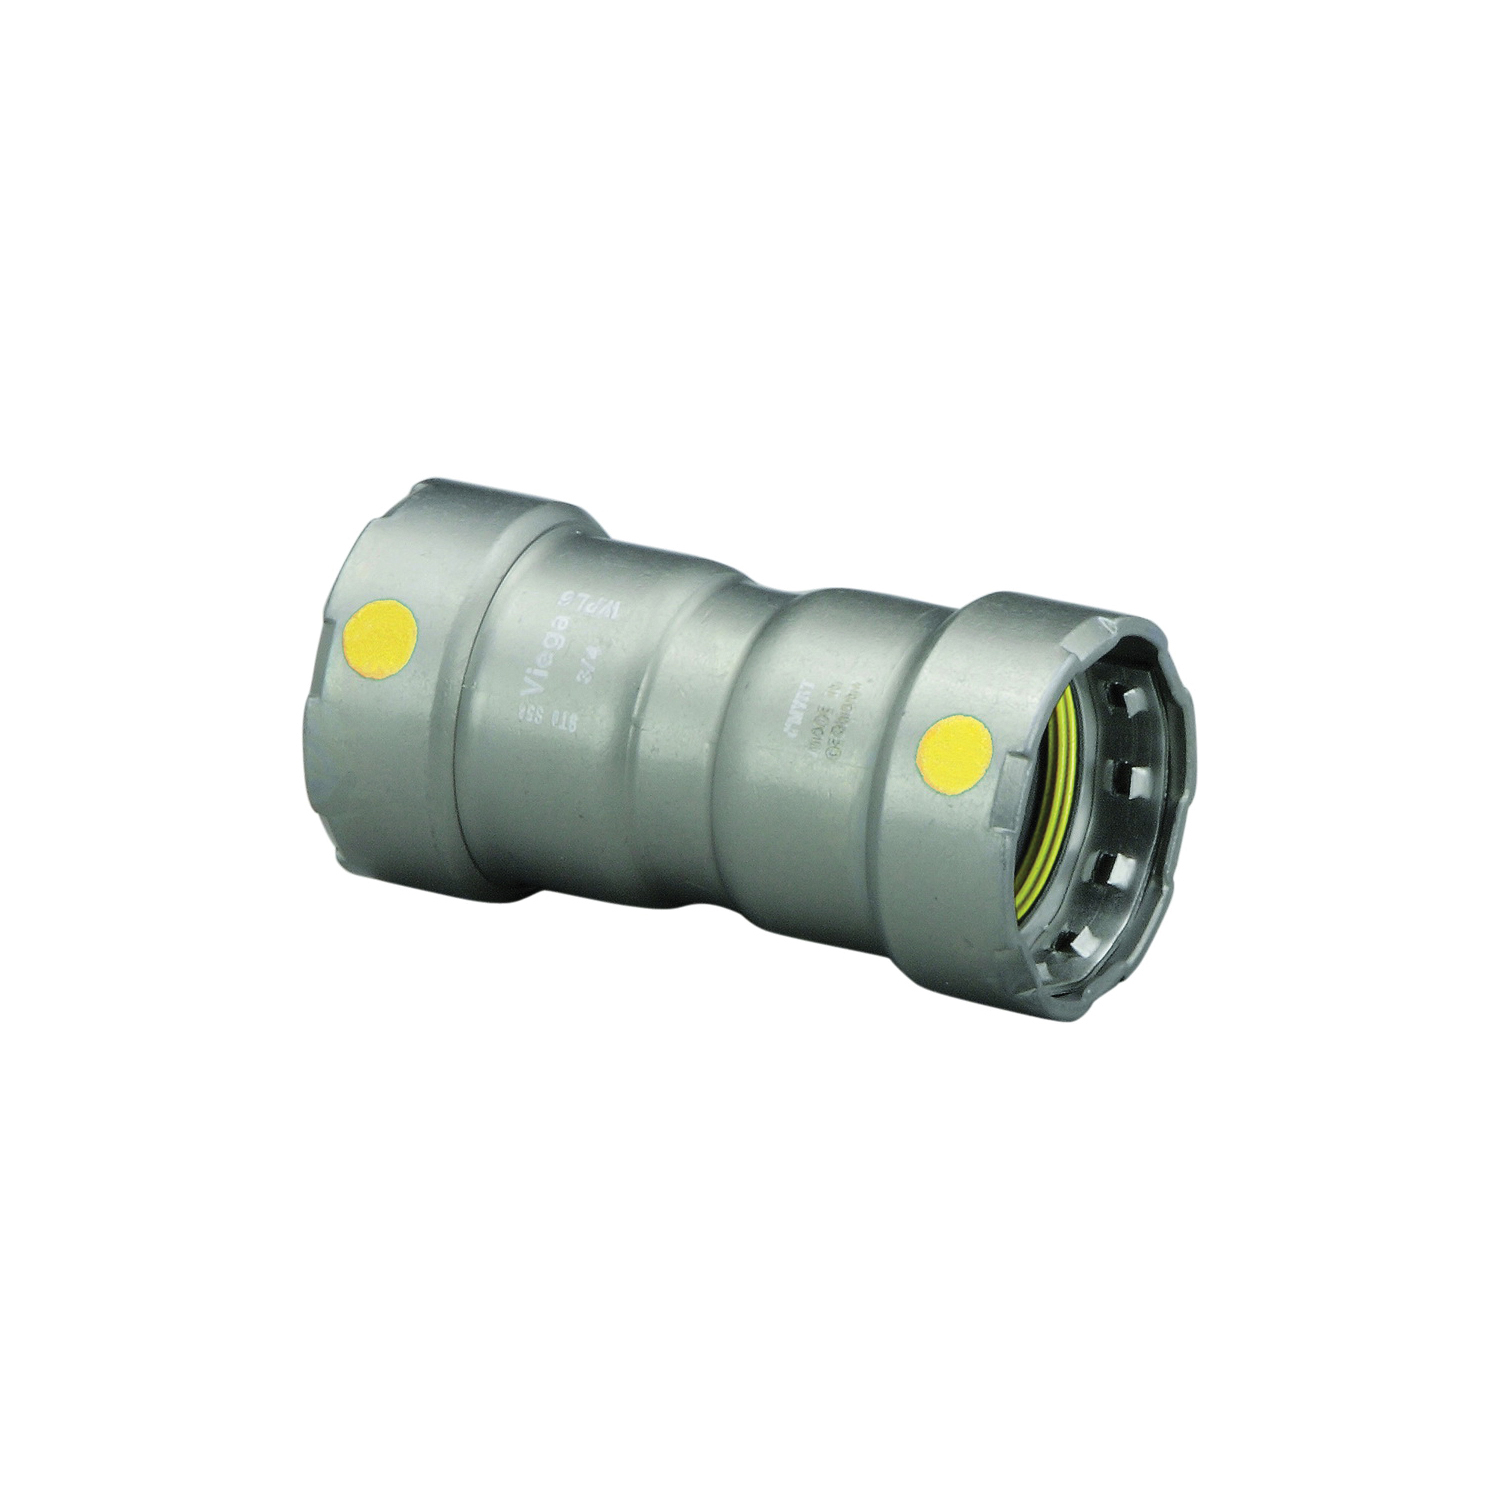 MegaPress®G 22009 Pipe Coupling With Stop, 3/4 in Nominal, Press End Style, Carbon Steel, Import